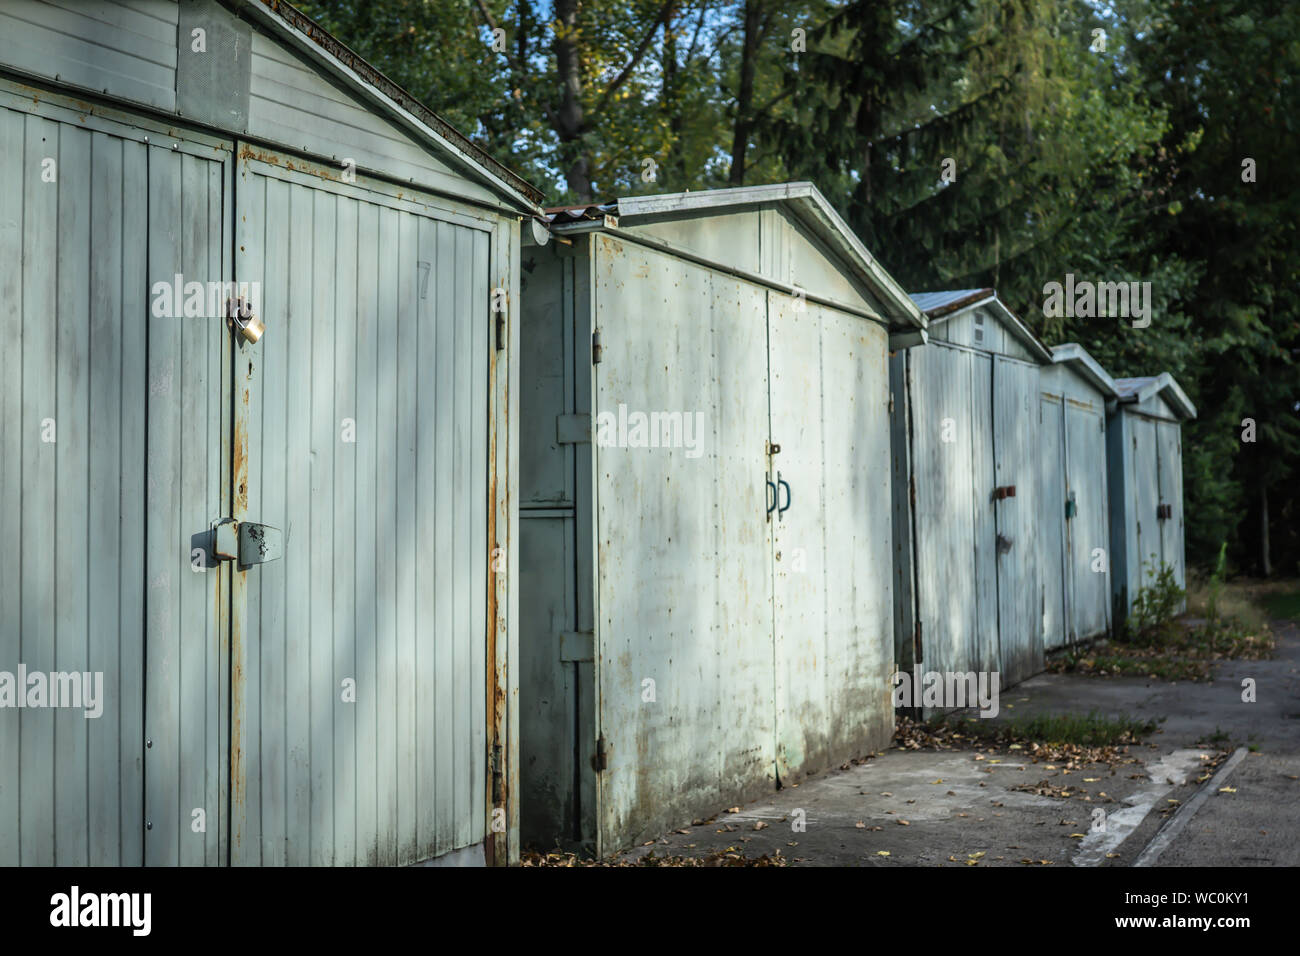 Abandoned old garages with locked doors Stock Photo